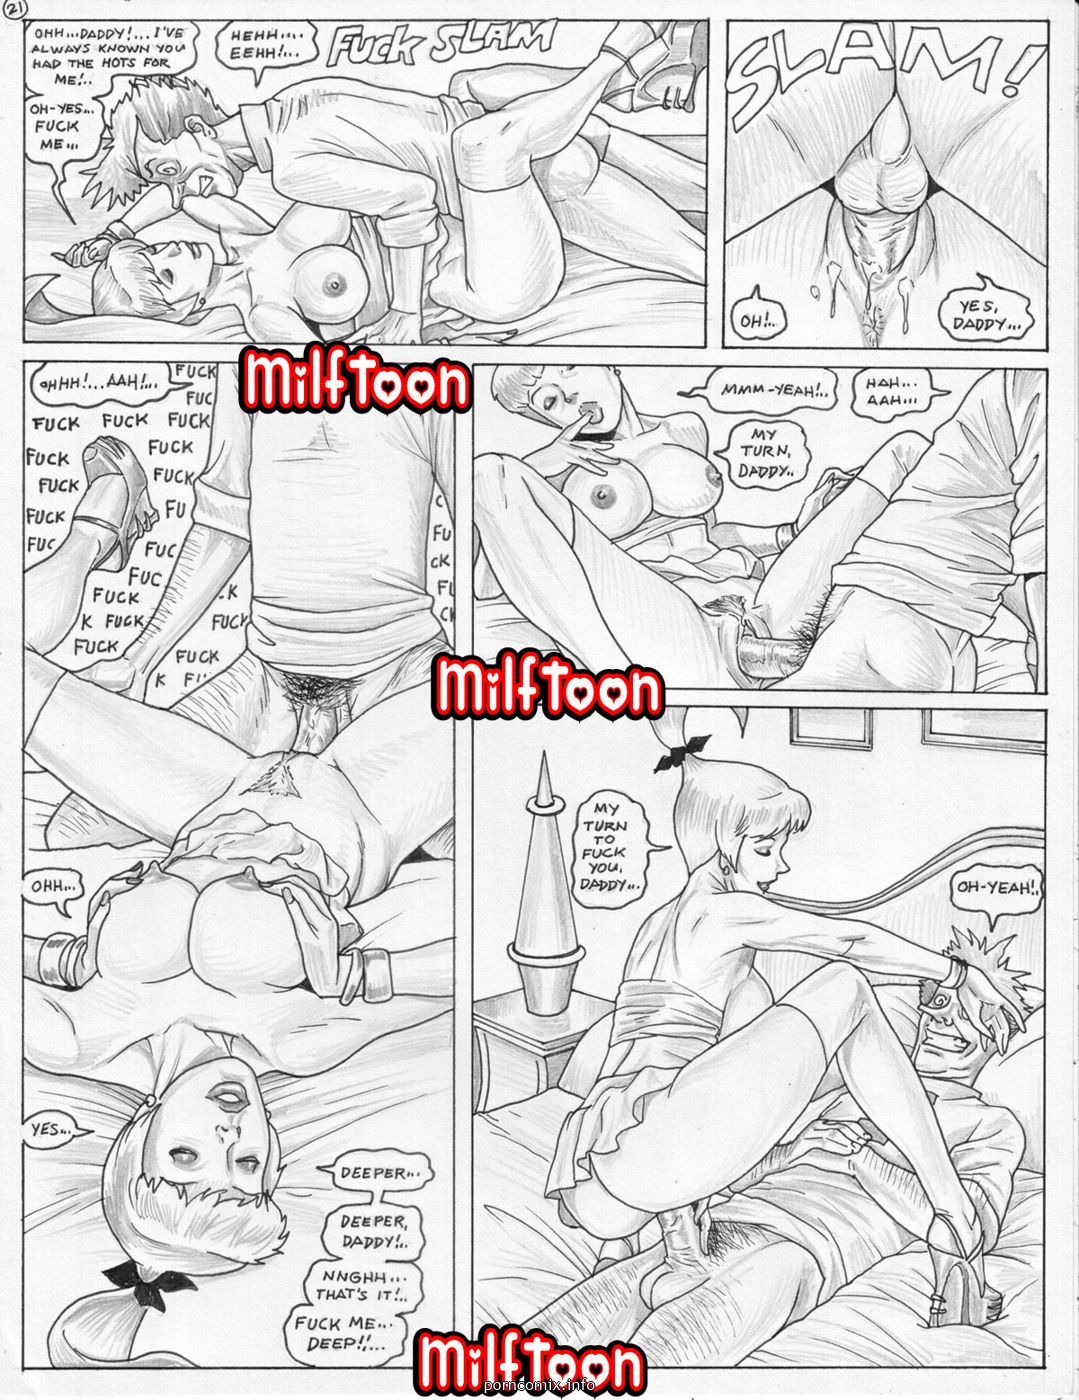 Milftoon - Jepsons page 23